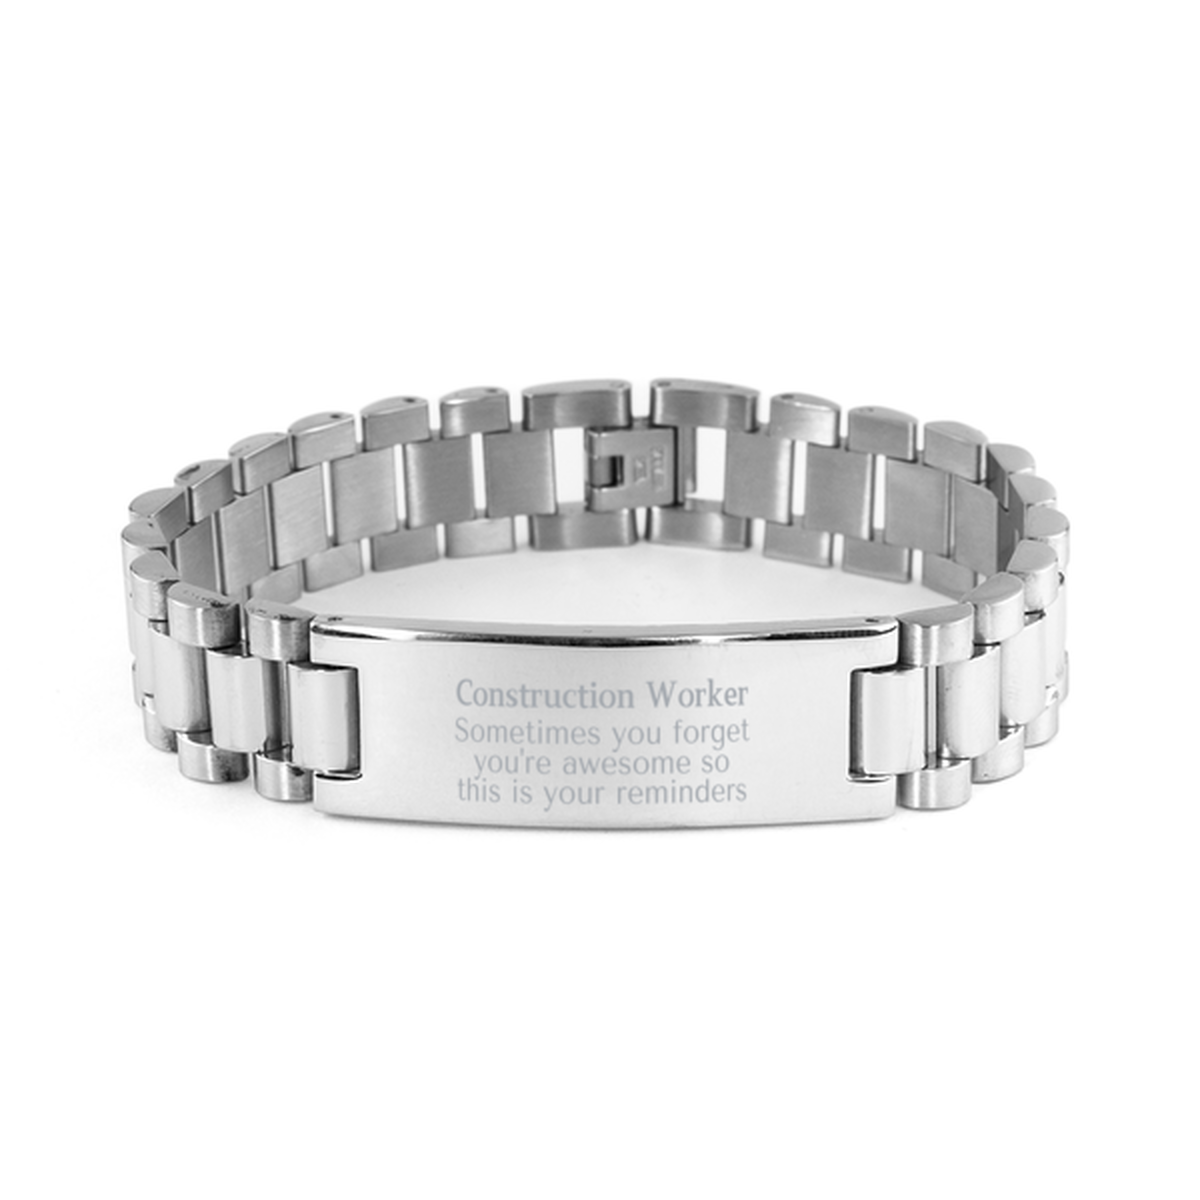 Sentimental Construction Worker Ladder Stainless Steel Bracelet, Construction Worker Sometimes you forget you're awesome so this is your reminders, Graduation Christmas Birthday Gifts for Construction Worker, Men, Women, Coworkers